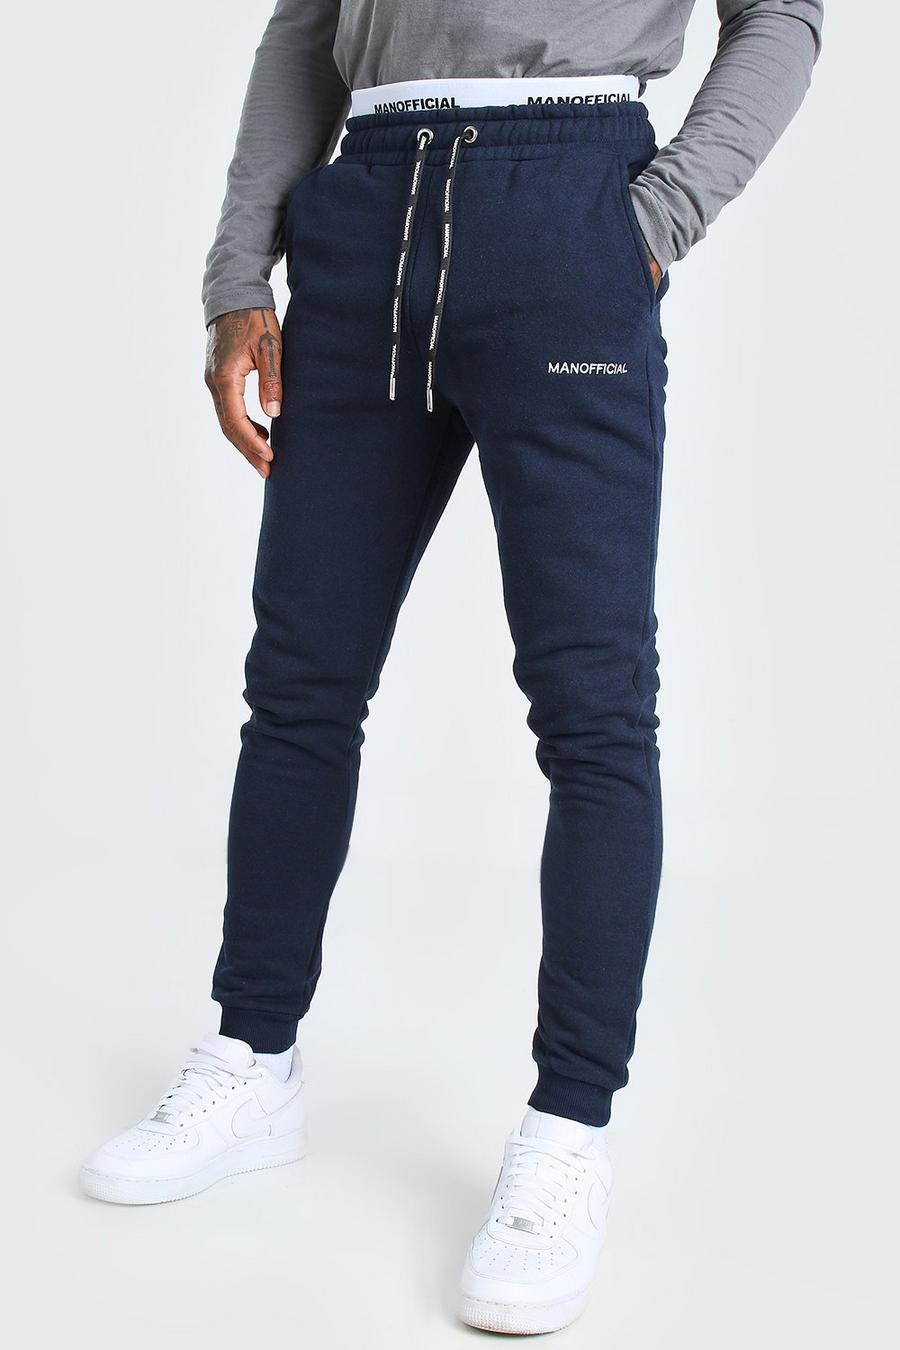 Navy Skinny Fit Man Official Double Waistband Track Pants image number 1